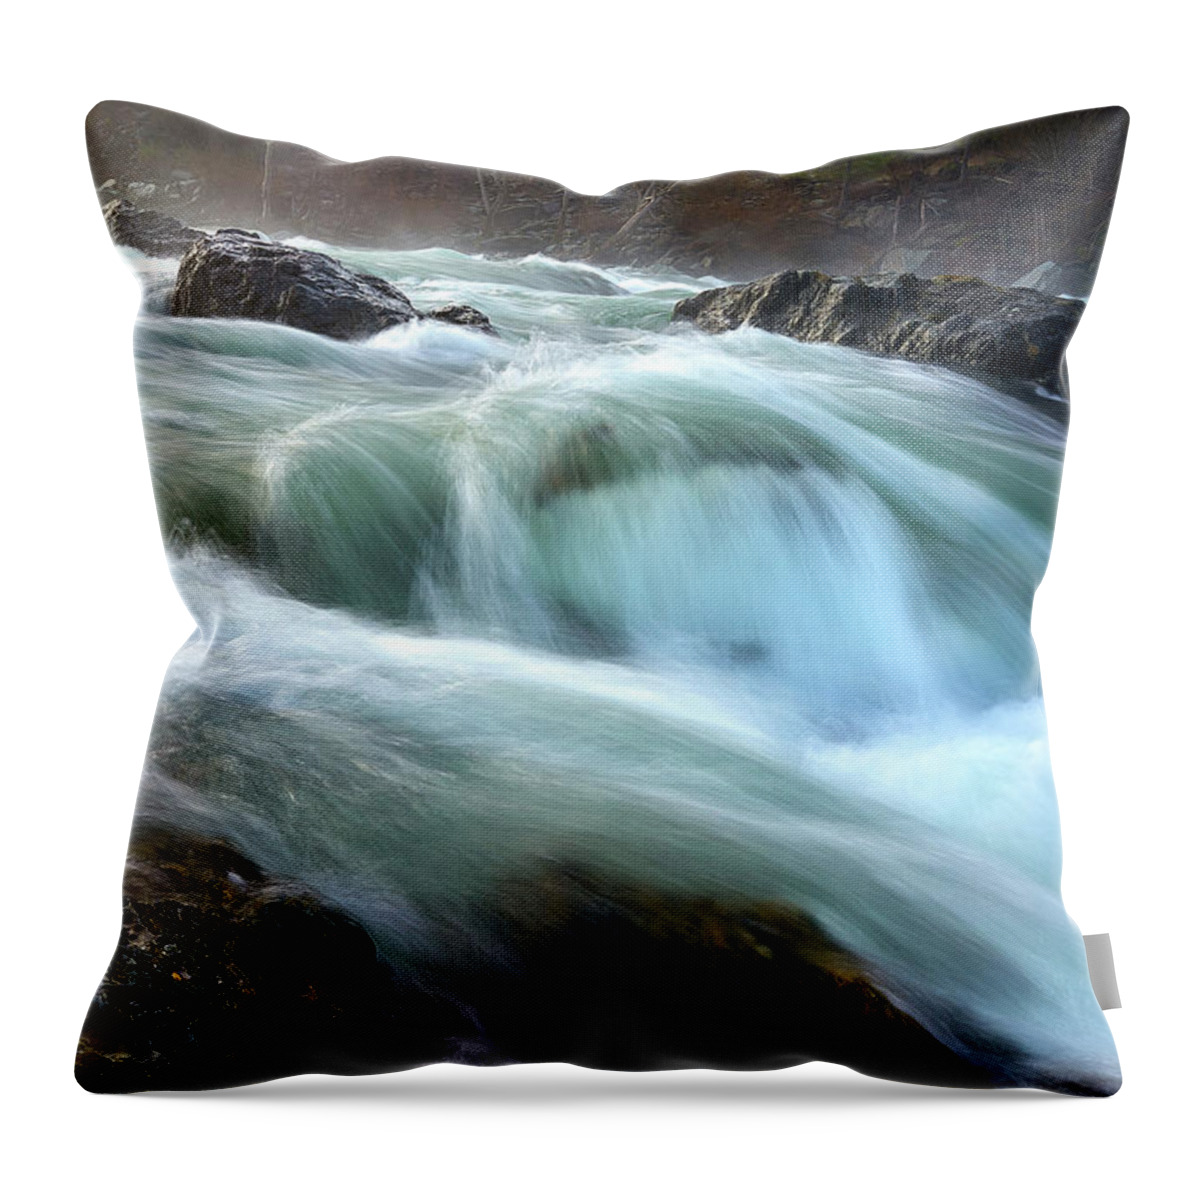 River Throw Pillow featuring the photograph Raging River by Janet Kopper